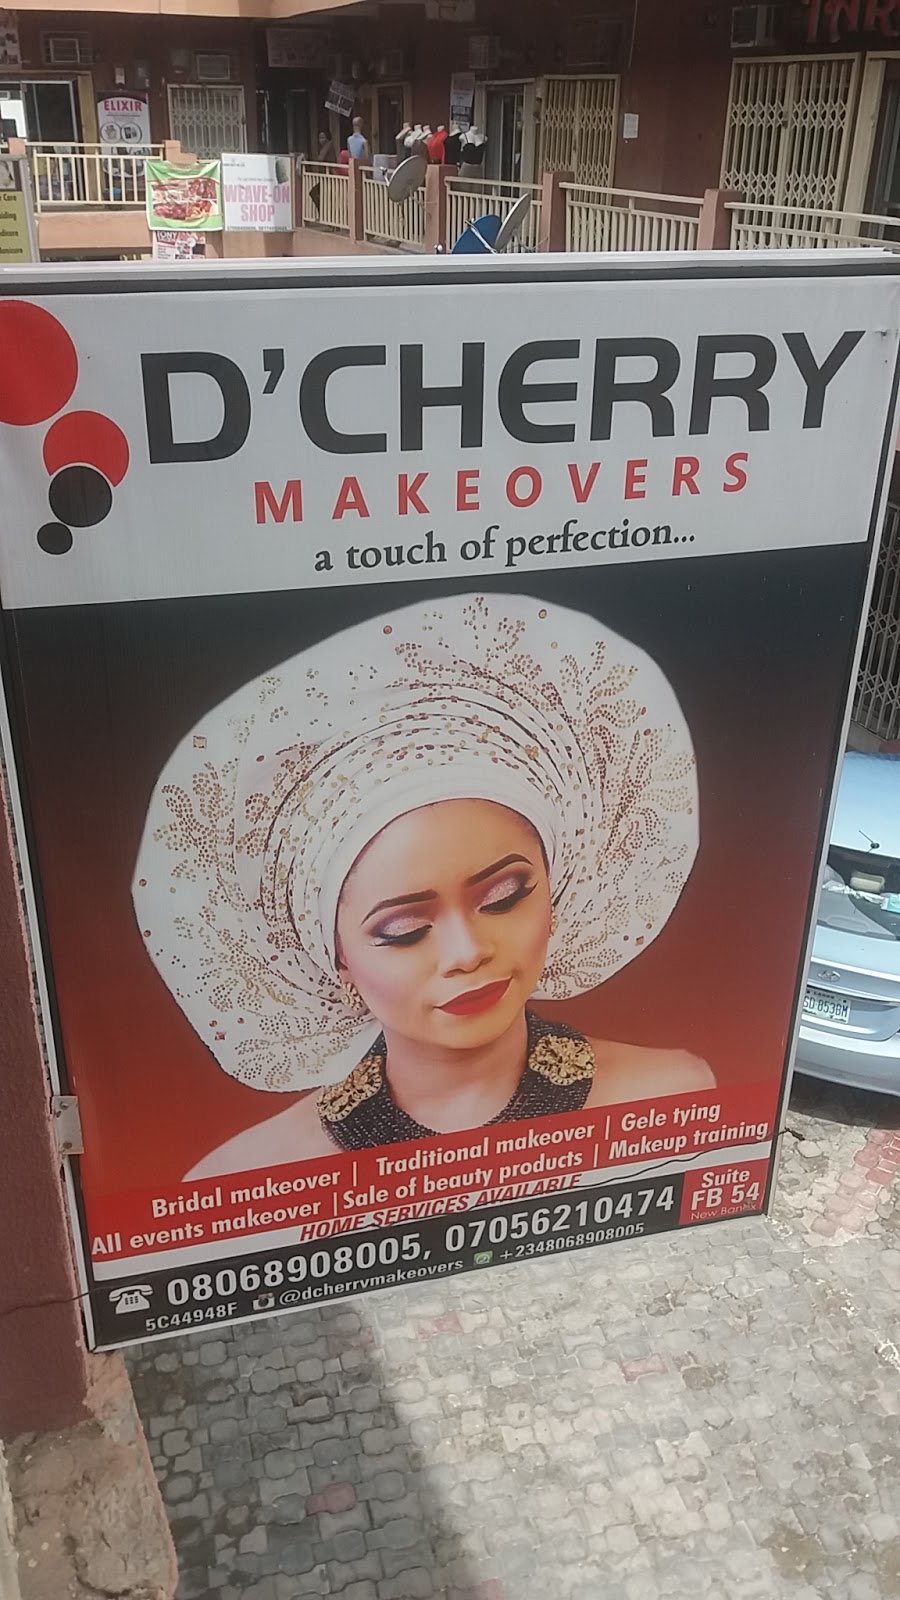 Dcherry Makeovers